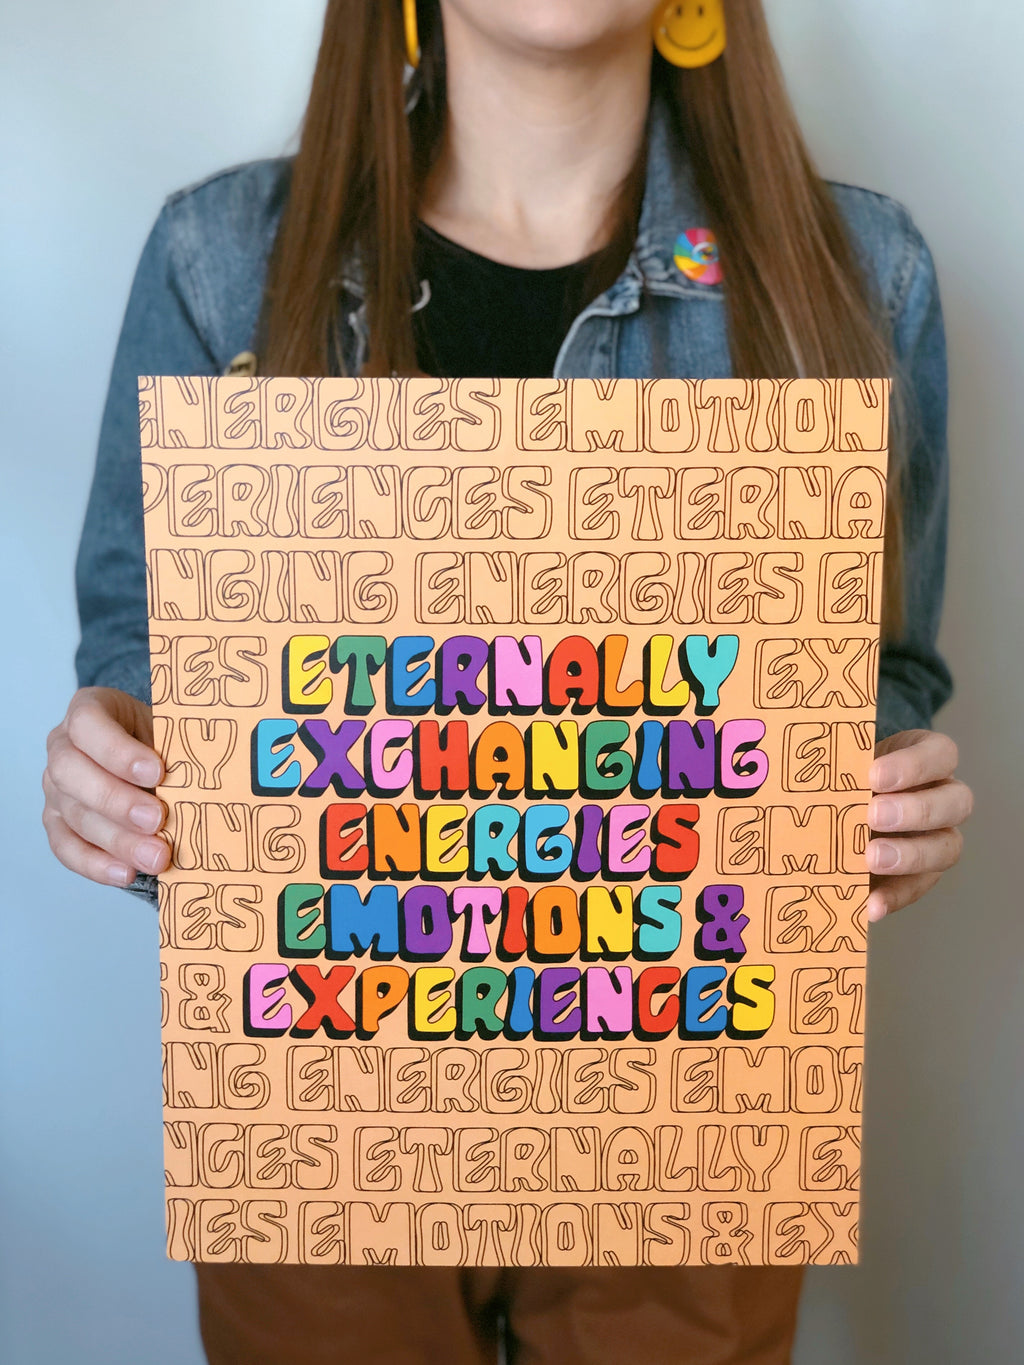 Engeries, Emotions, Experiences Poster